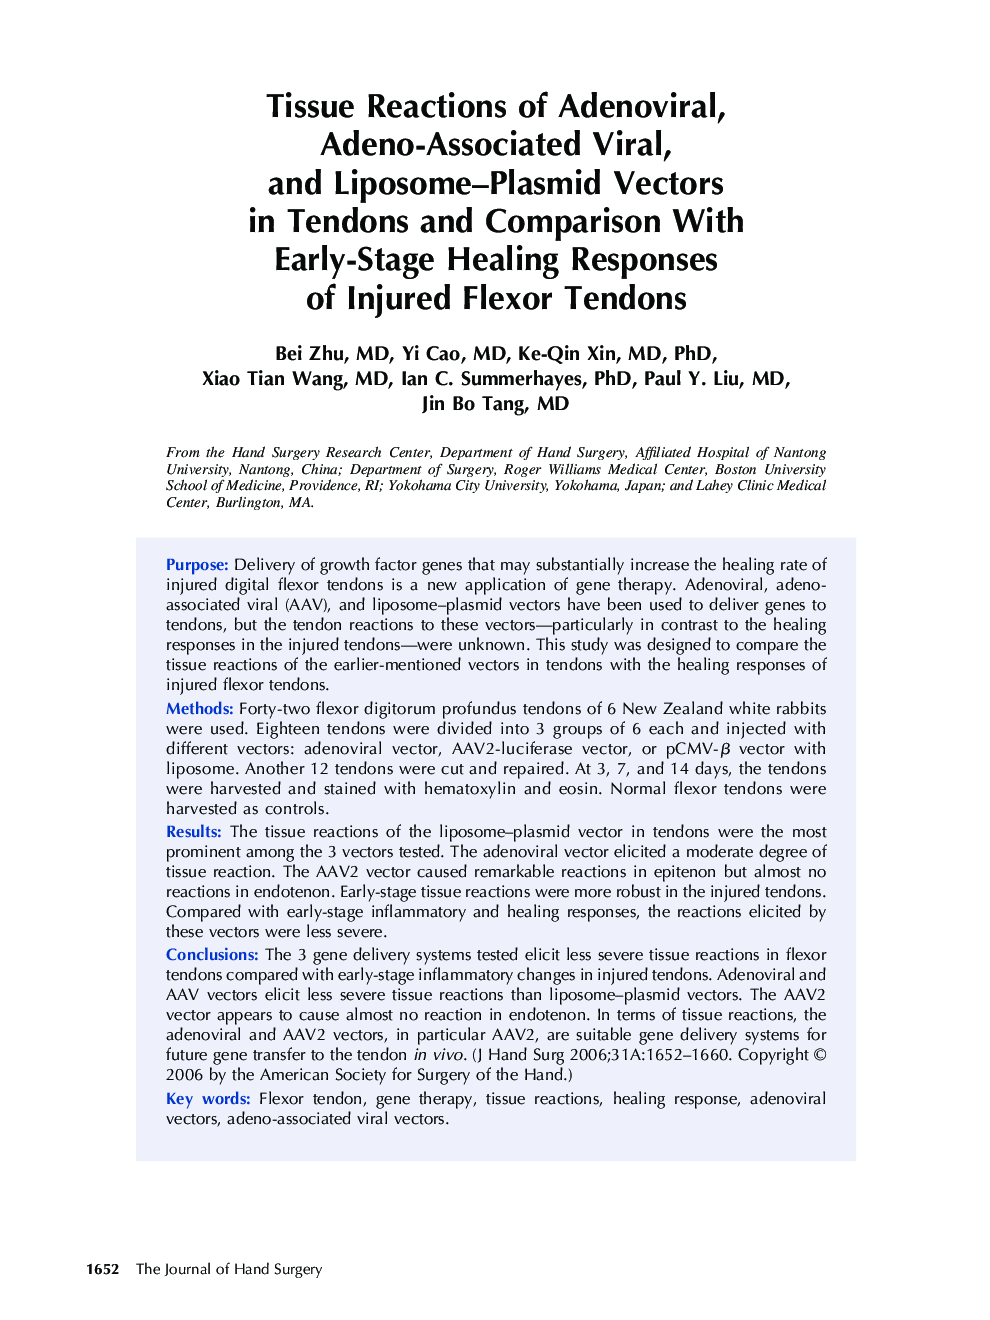 Tissue Reactions of Adenoviral, Adeno-Associated Viral, and Liposome-Plasmid Vectors in Tendons and Comparison With Early-Stage Healing Responses of Injured Flexor Tendons